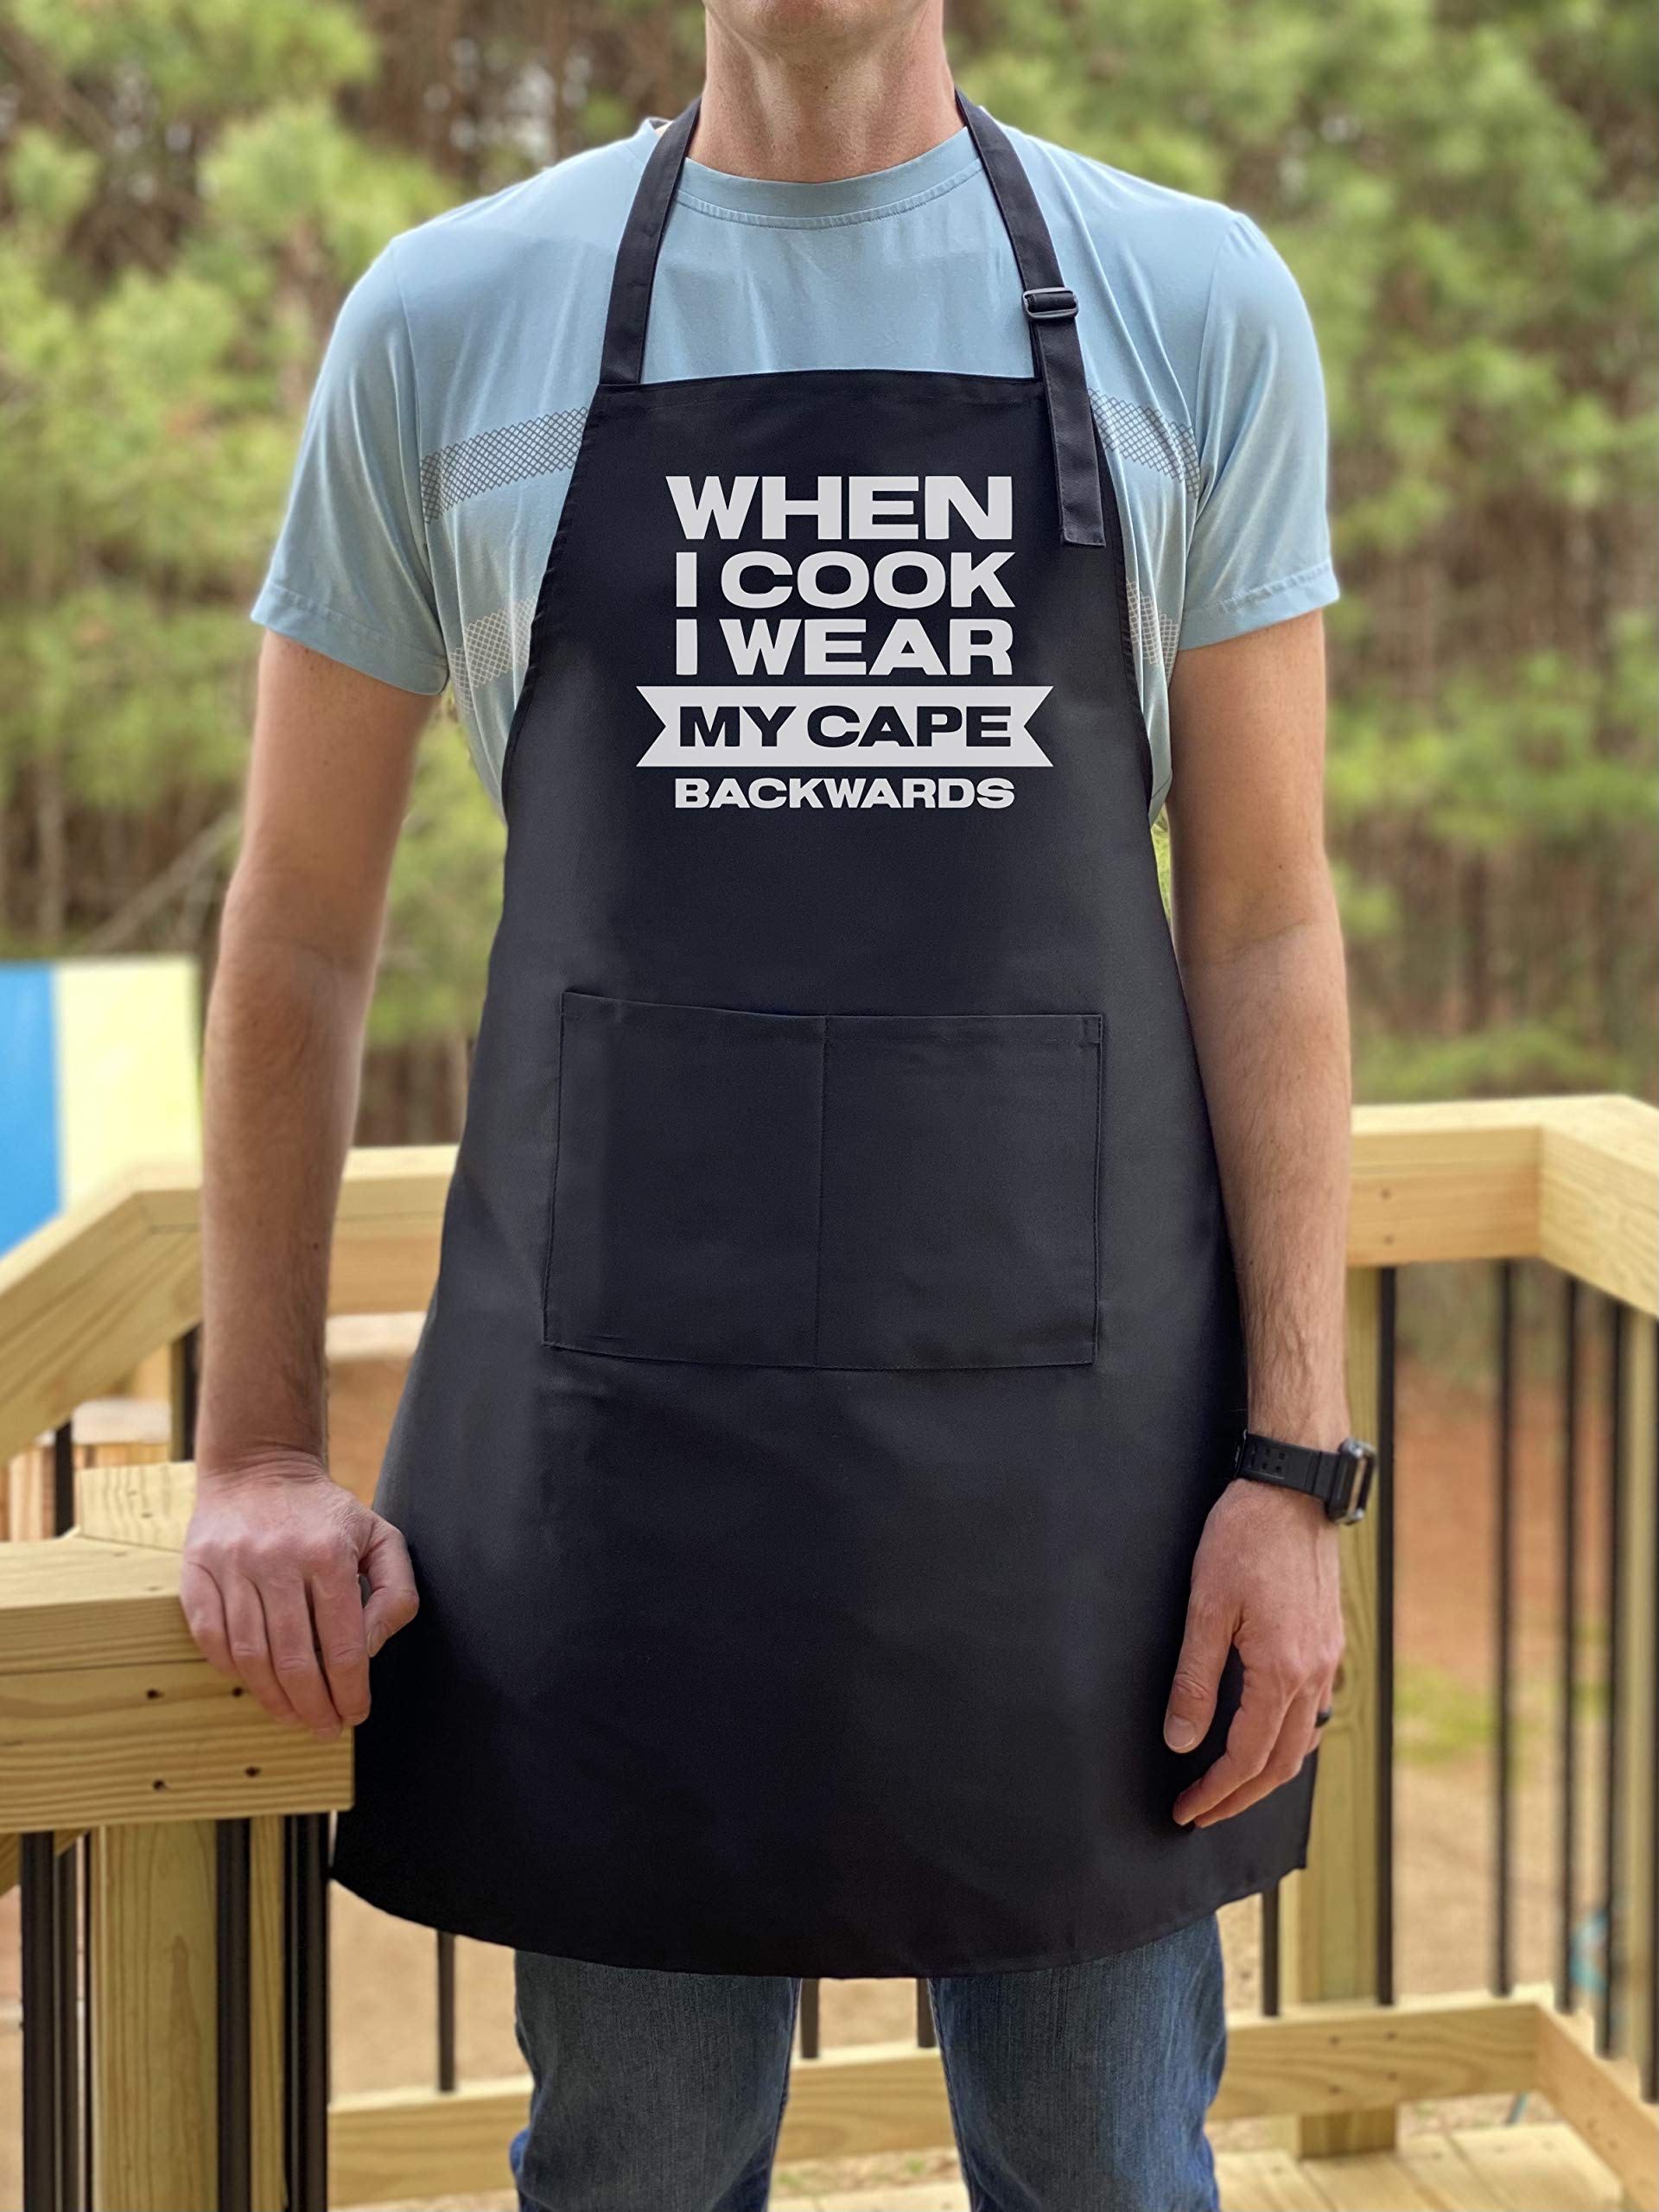 UP THE MOMENT When I Cook I Wear My Cape Backwards Apron, Funny Apron for Men, BBQ Grill Apron, Chef Apron, Funny Apron for Dad, Mens Funny Apron, Funny Chef Apron for Men